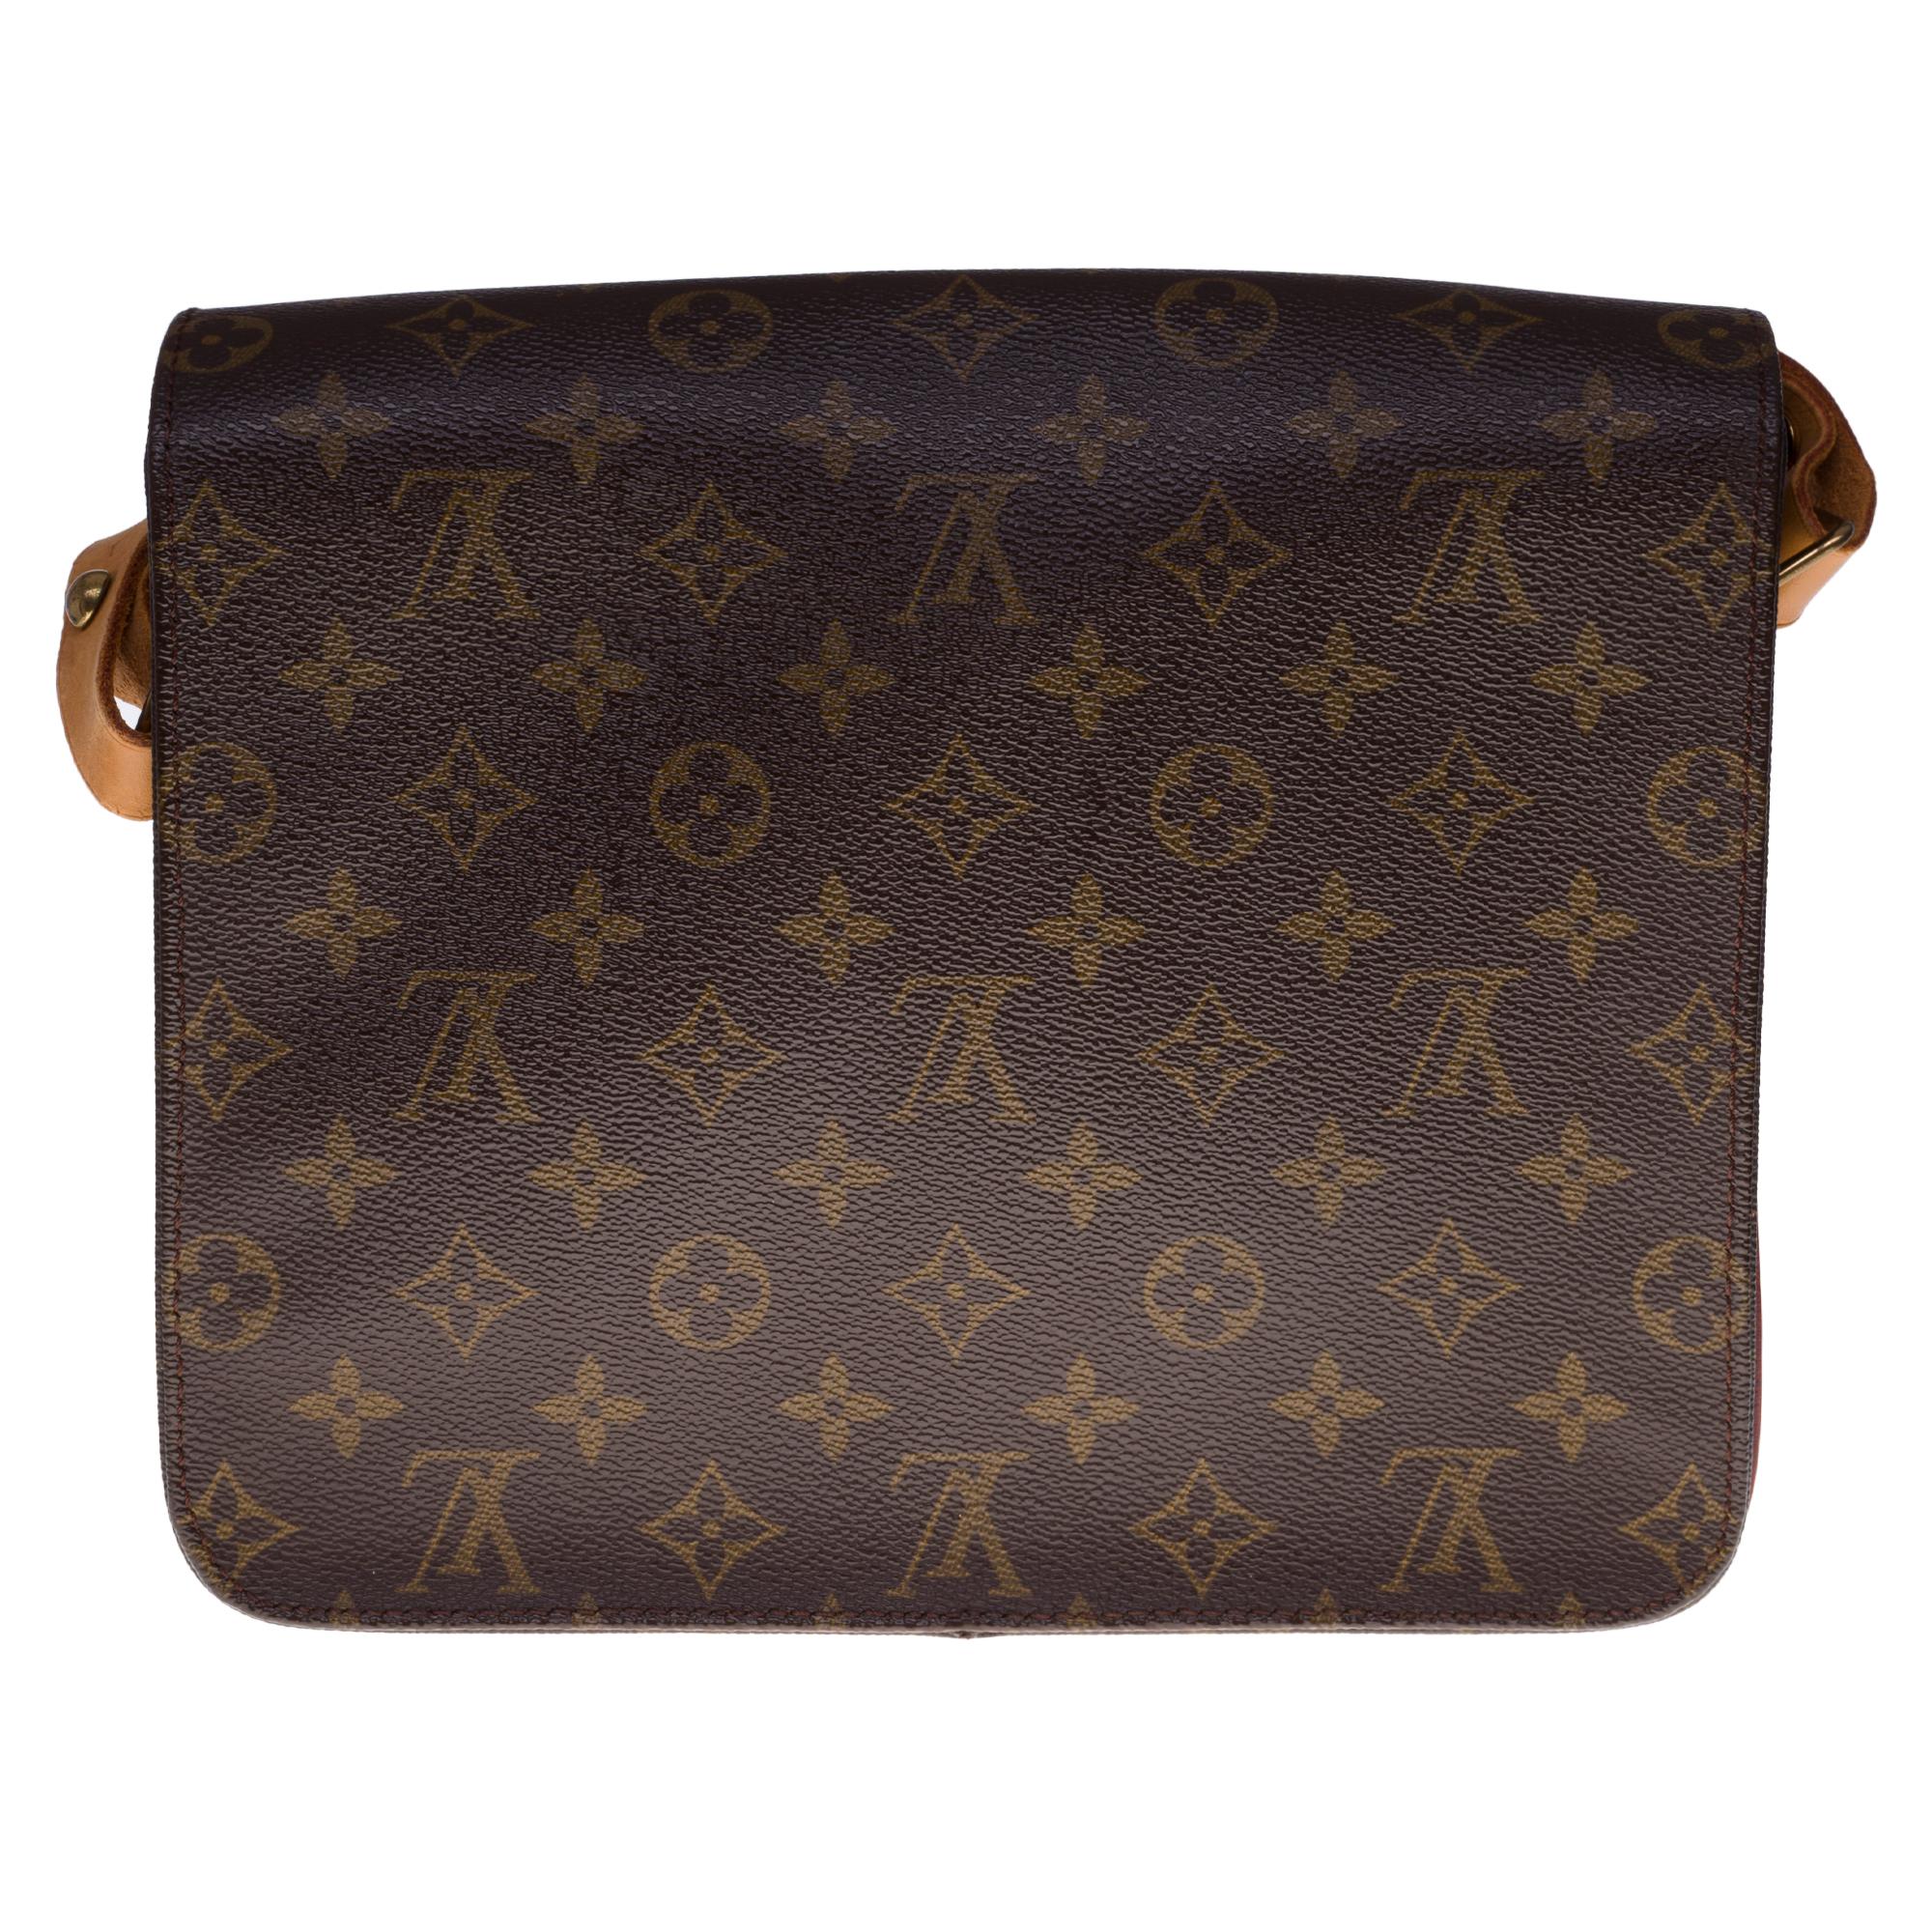 The very practical shoulder bag Louis Vuitton Cartouchière large model in brown monogram canvas and natural leather, gold metal hardware, yellow stitching, an adjustable handle in natural leather allowing a shoulder or shoulder strap.

Fastening by